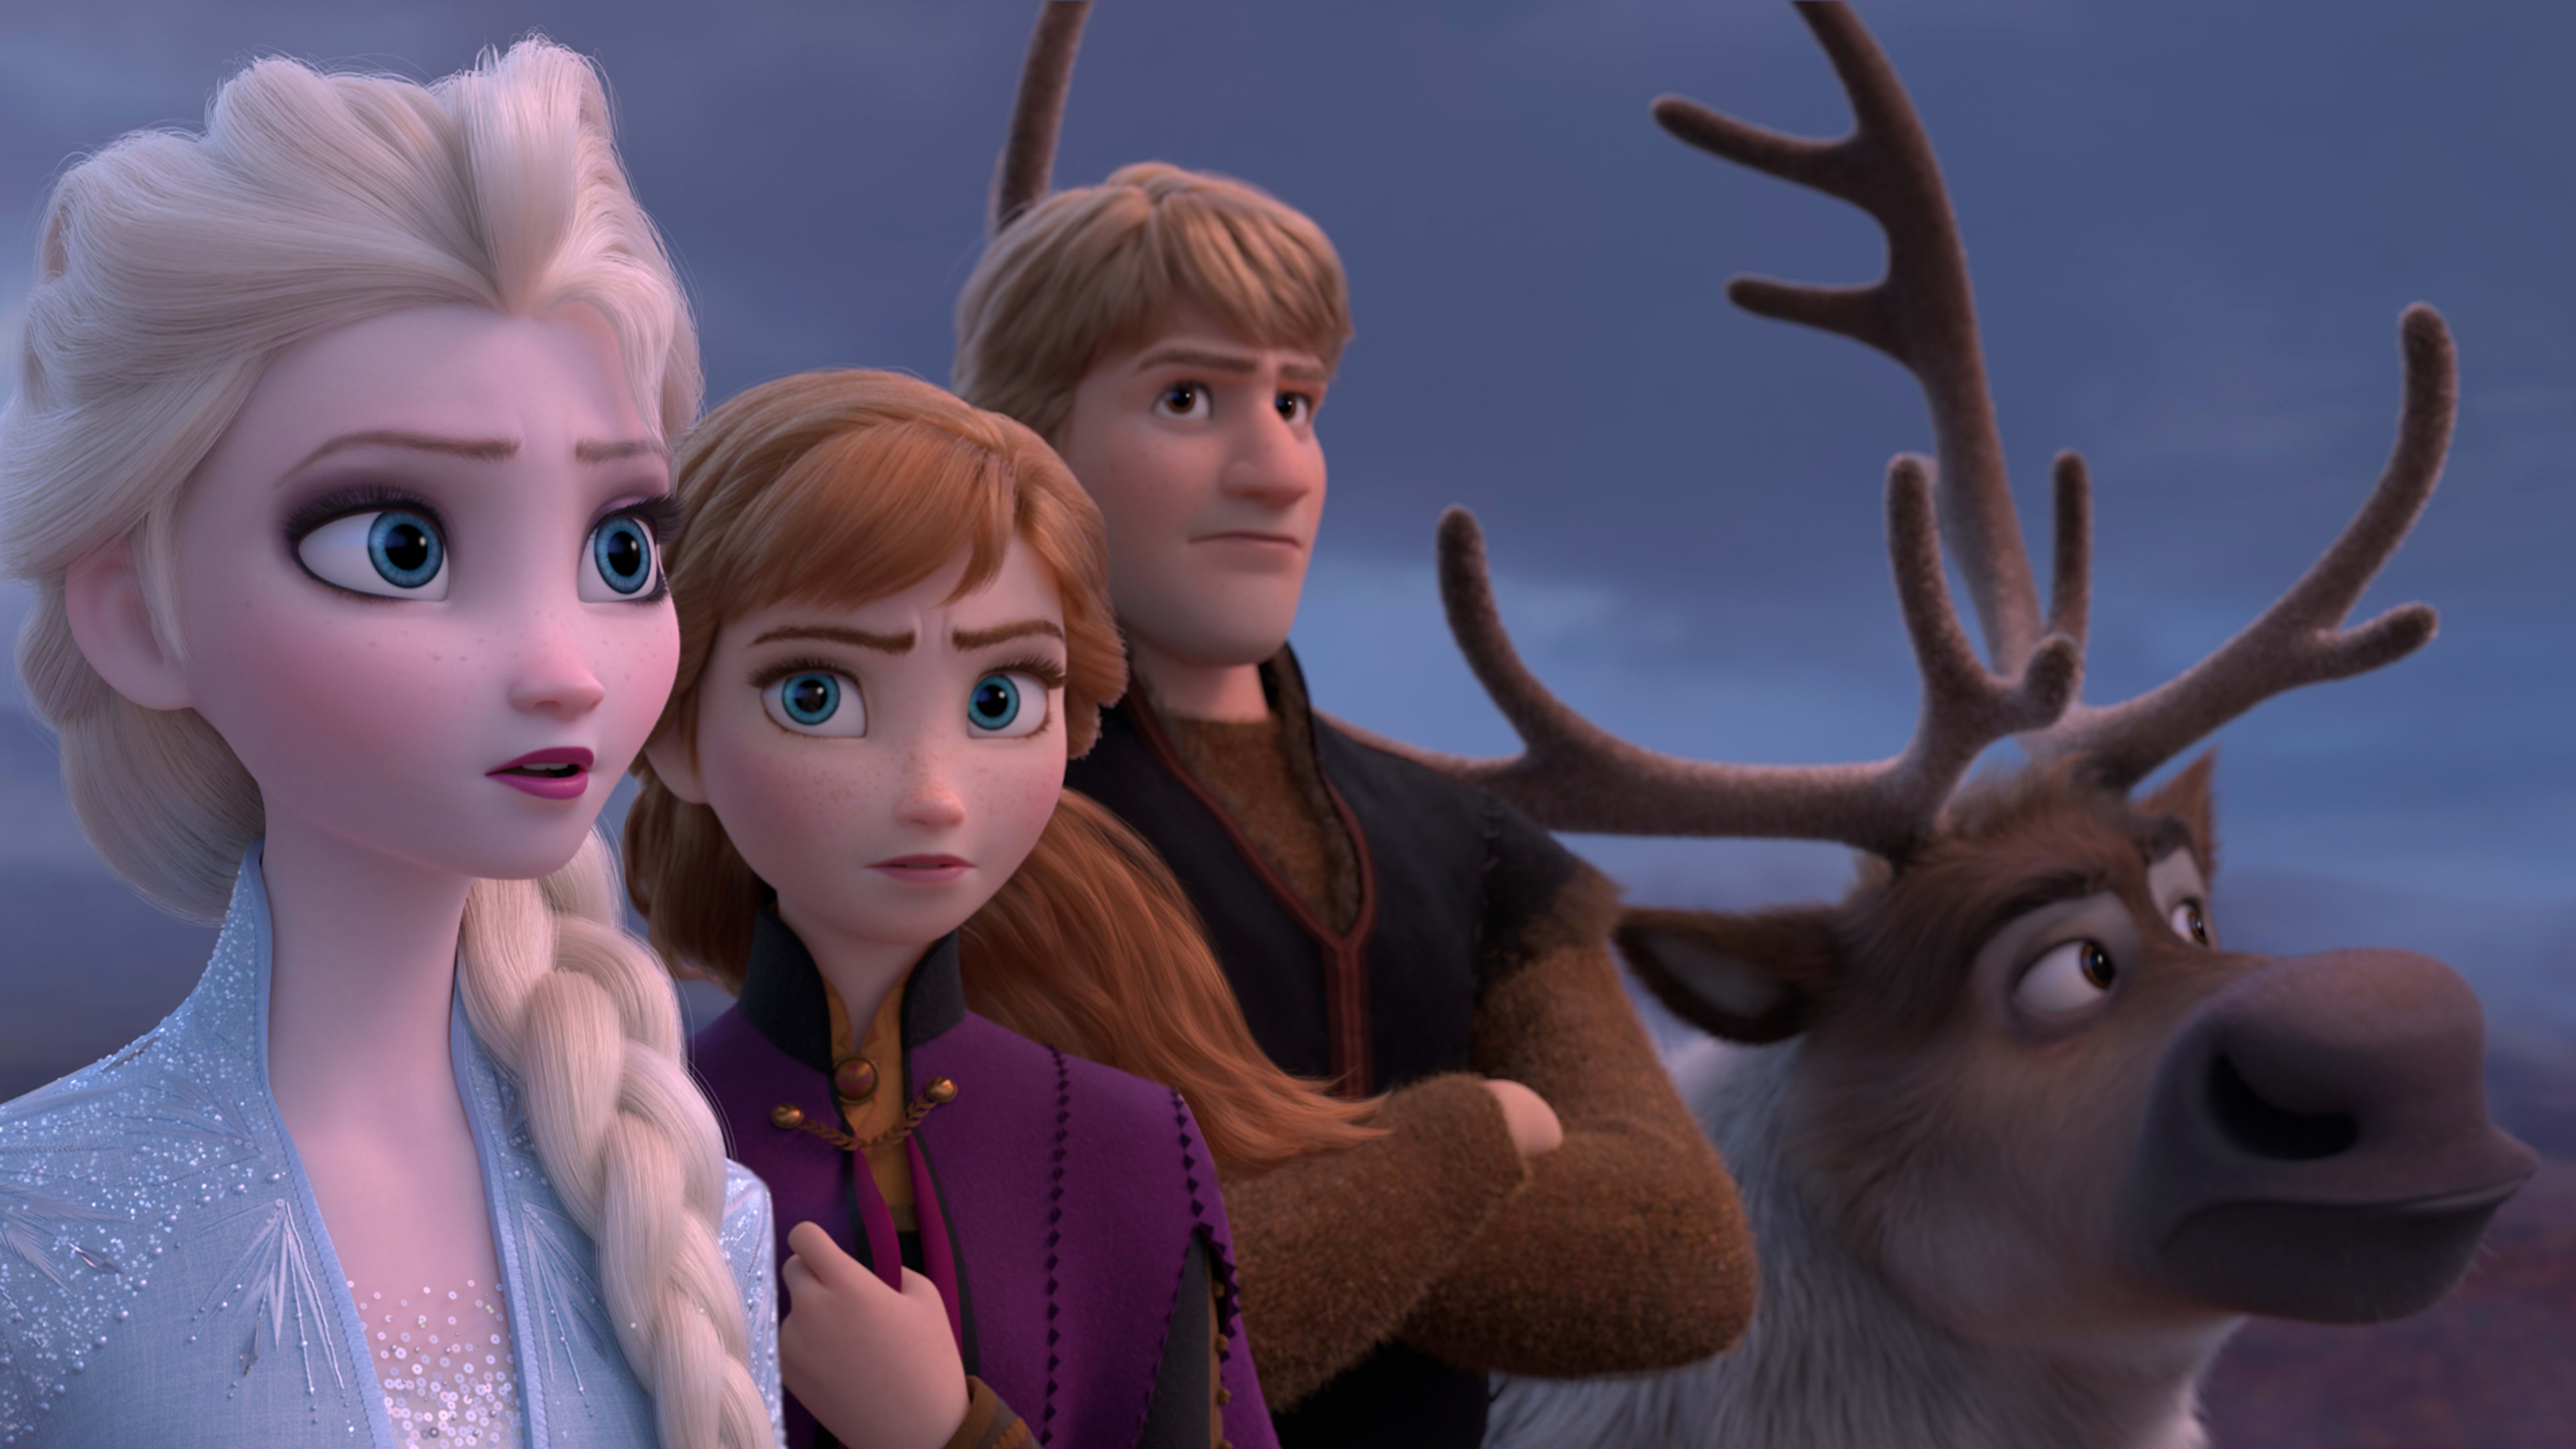 ‘Frozen 2’ got snubbed by the Oscars—and that’s a good thing